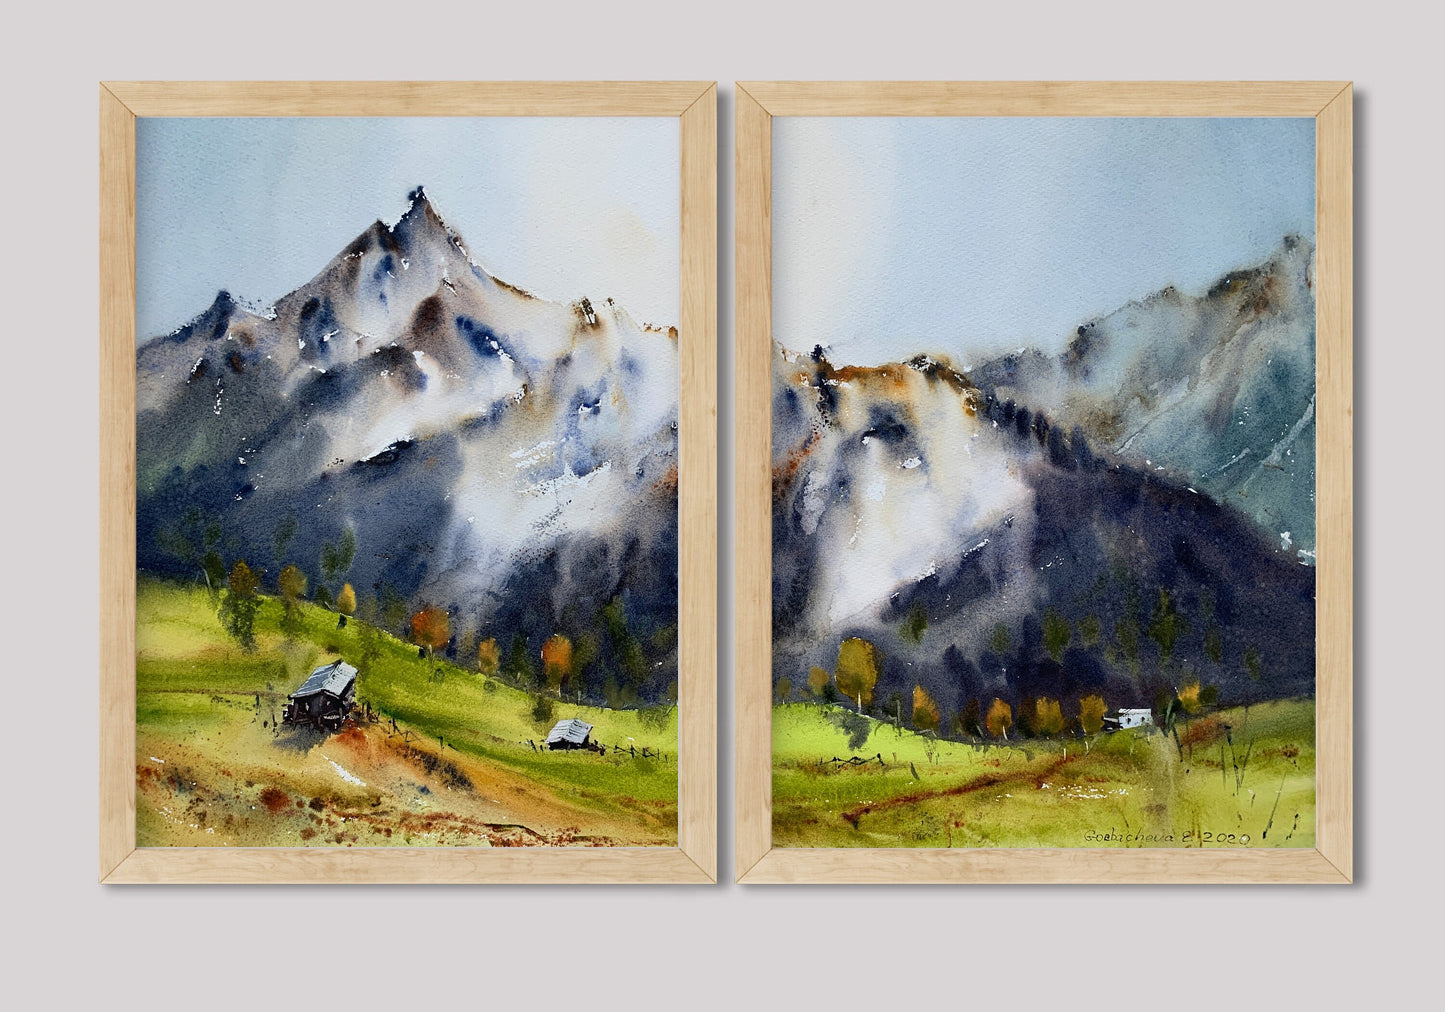 Split Painting, Mountain Set of 2 Prints, Alpine Wall Art, Nature Decor, Watercolor Scenery Painting, Extra Large Print